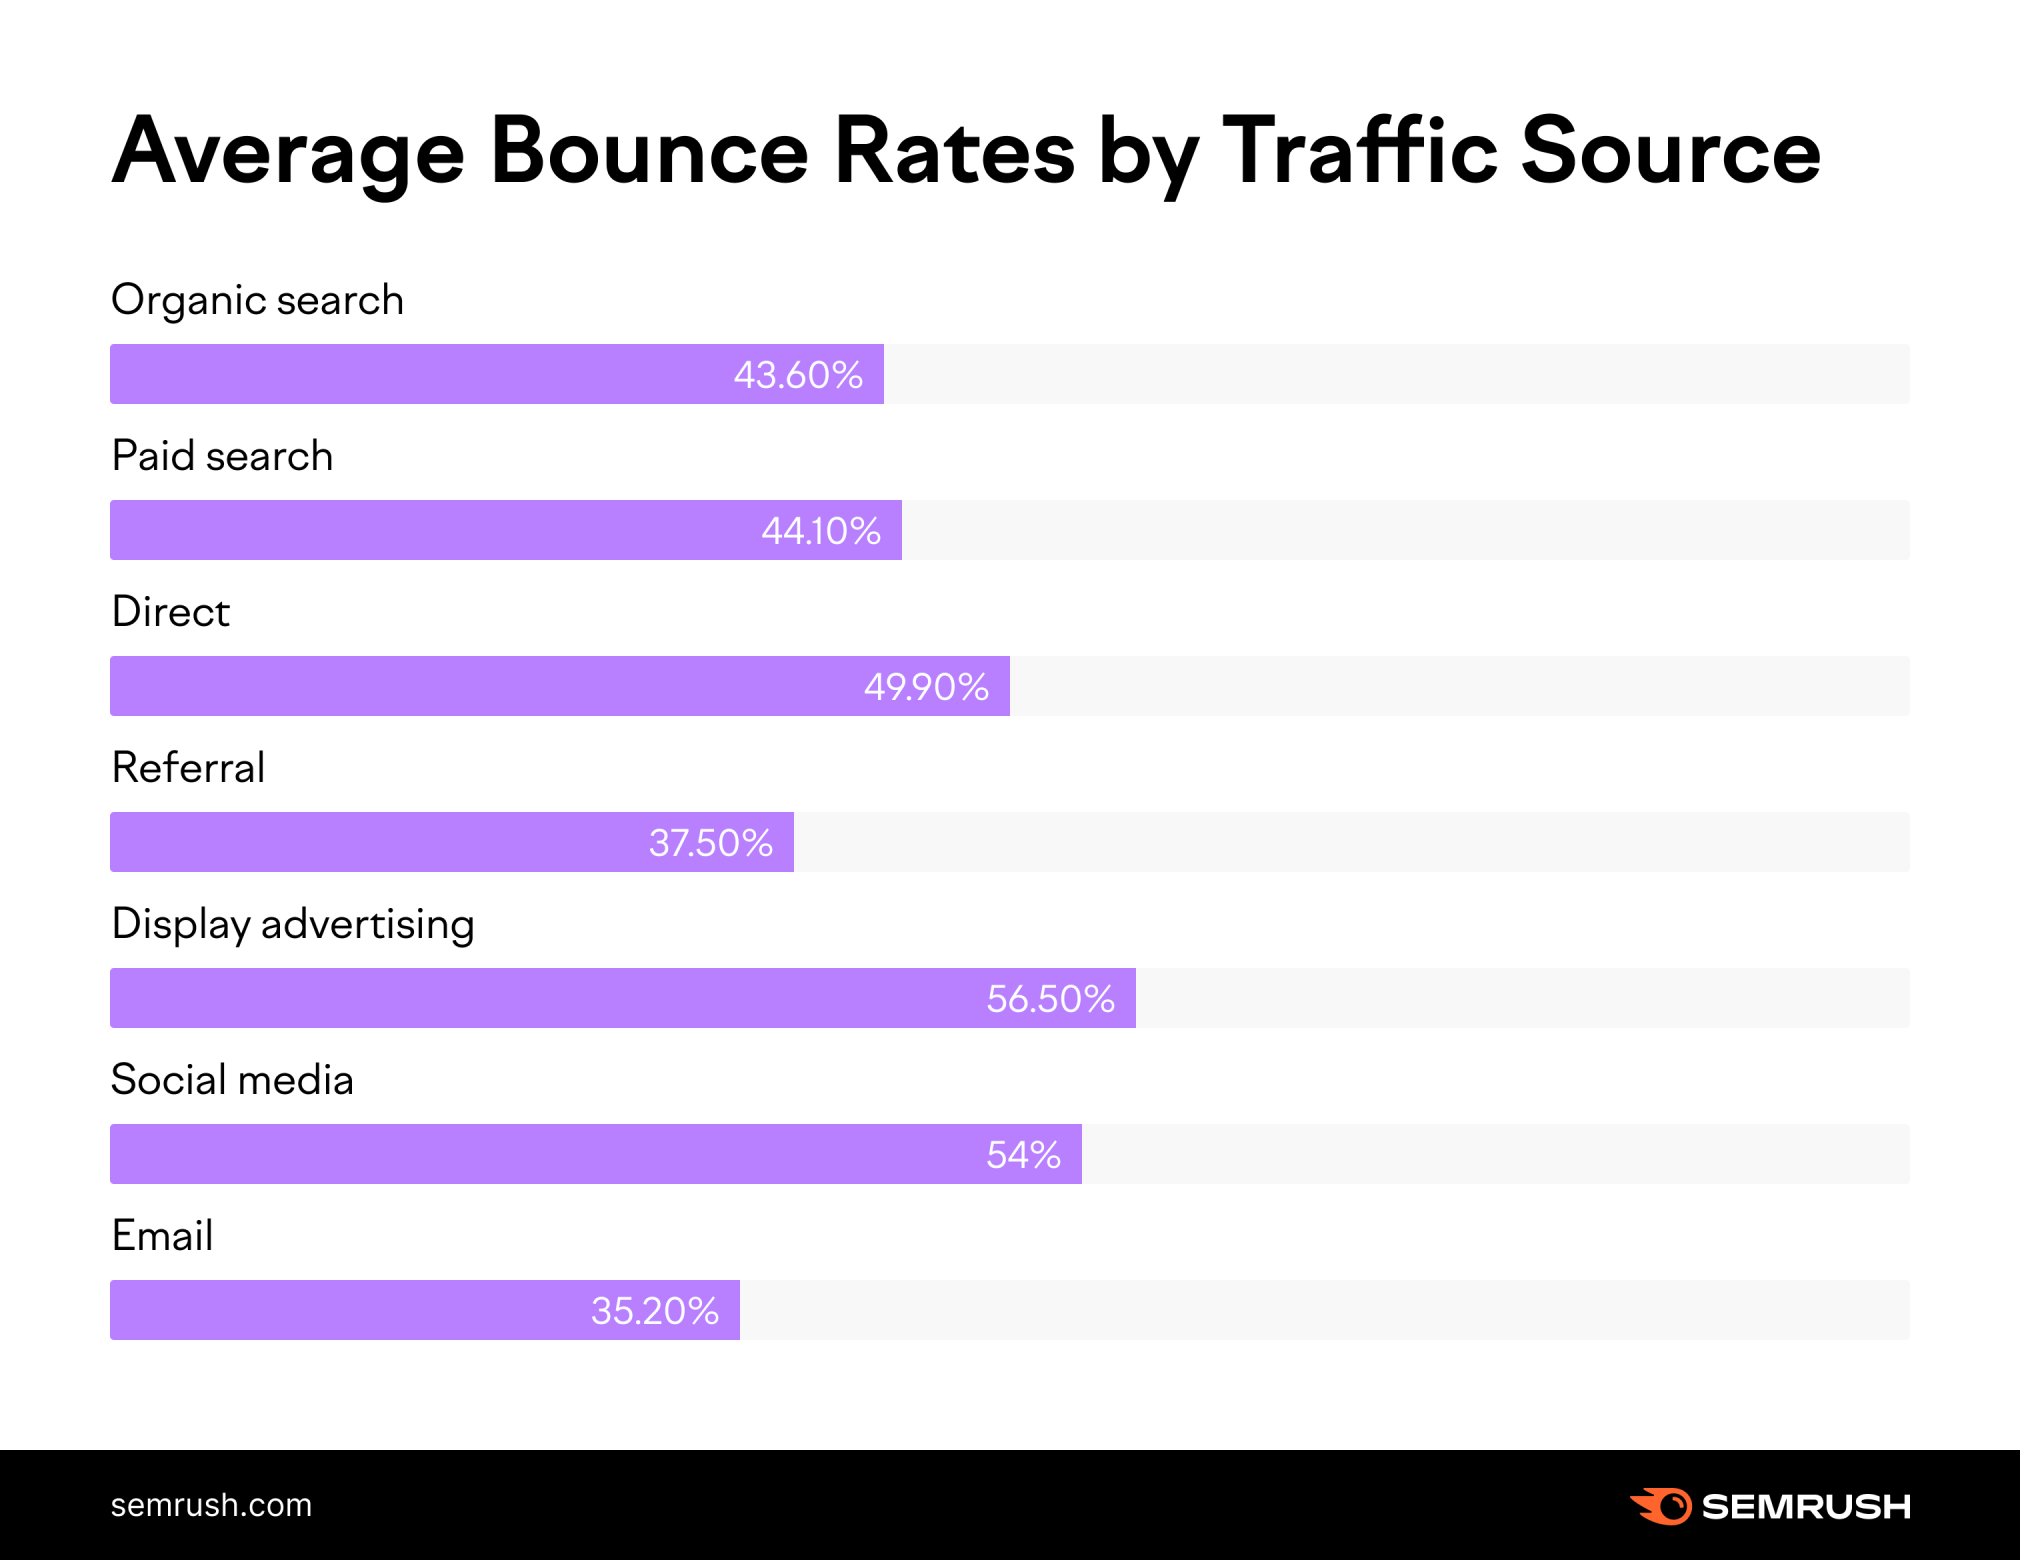 Average bounce rates by traffic source